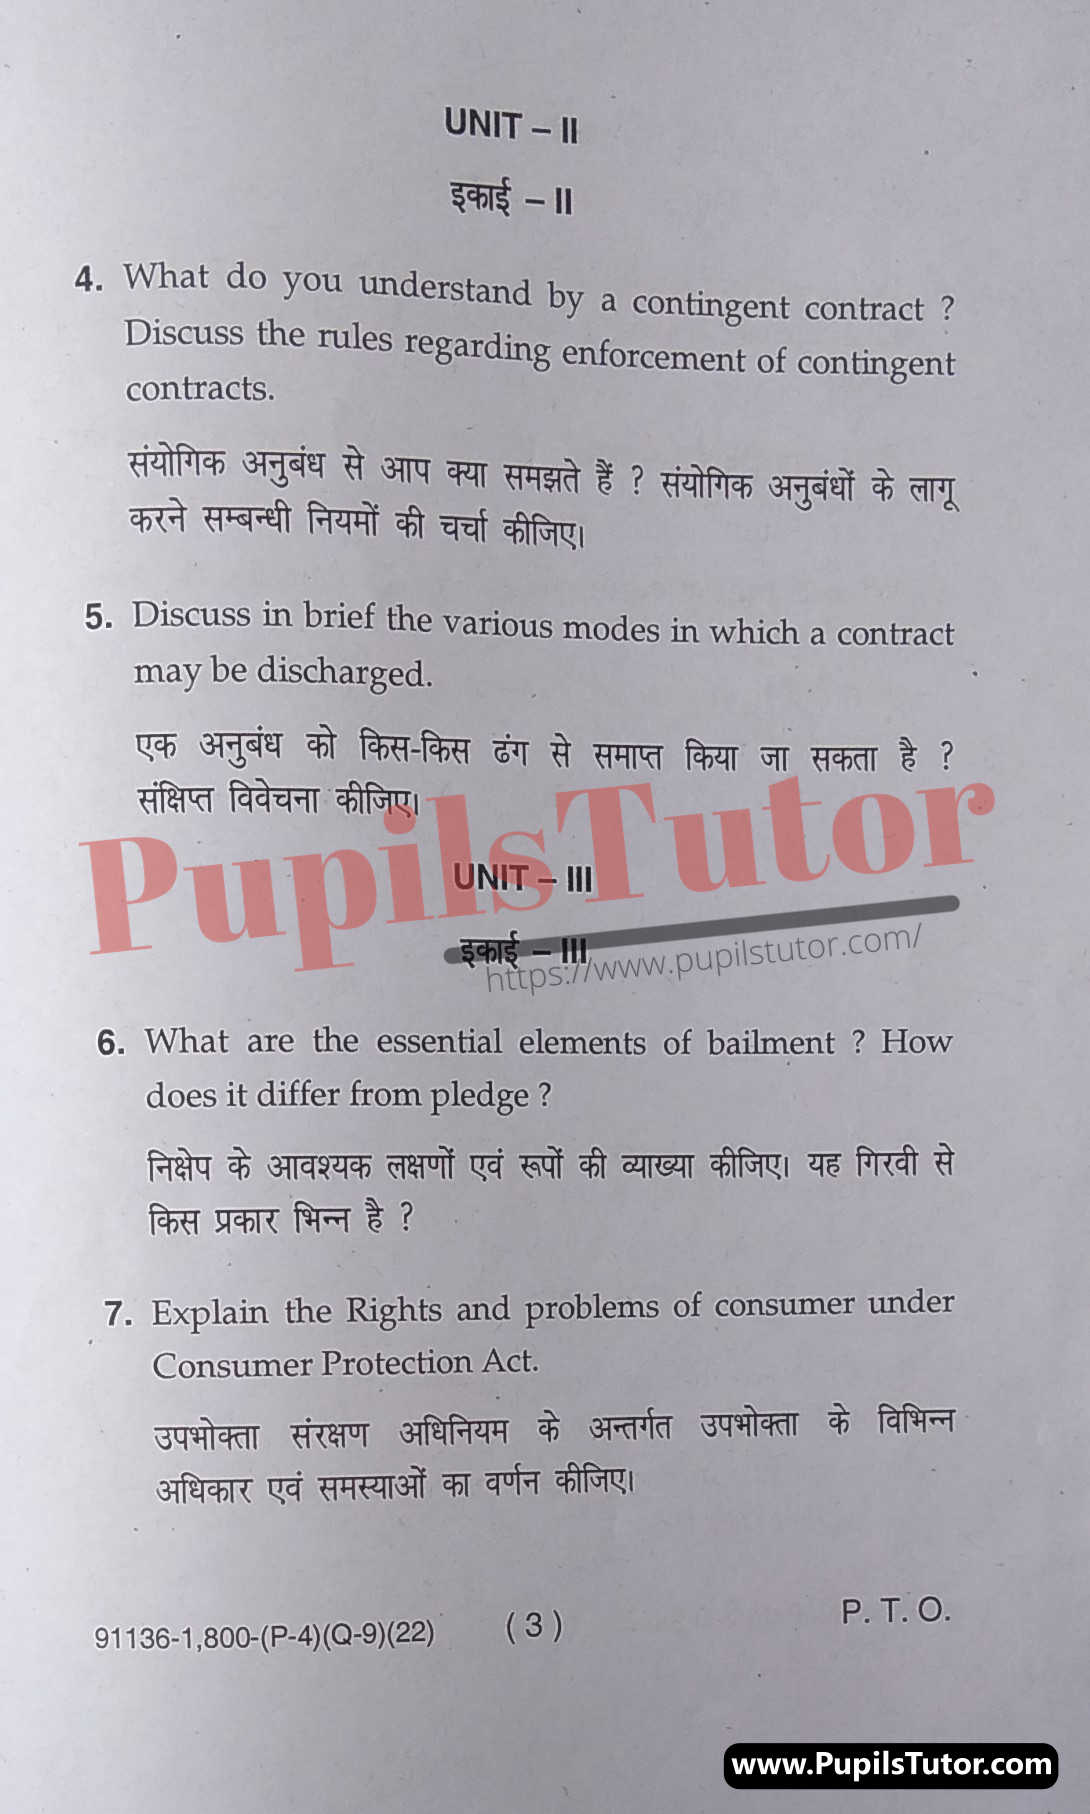 Free Download PDF Of M.D. University B.Com. First Semester Latest Question Paper For Business Law Subject (Page 3) - https://www.pupilstutor.com